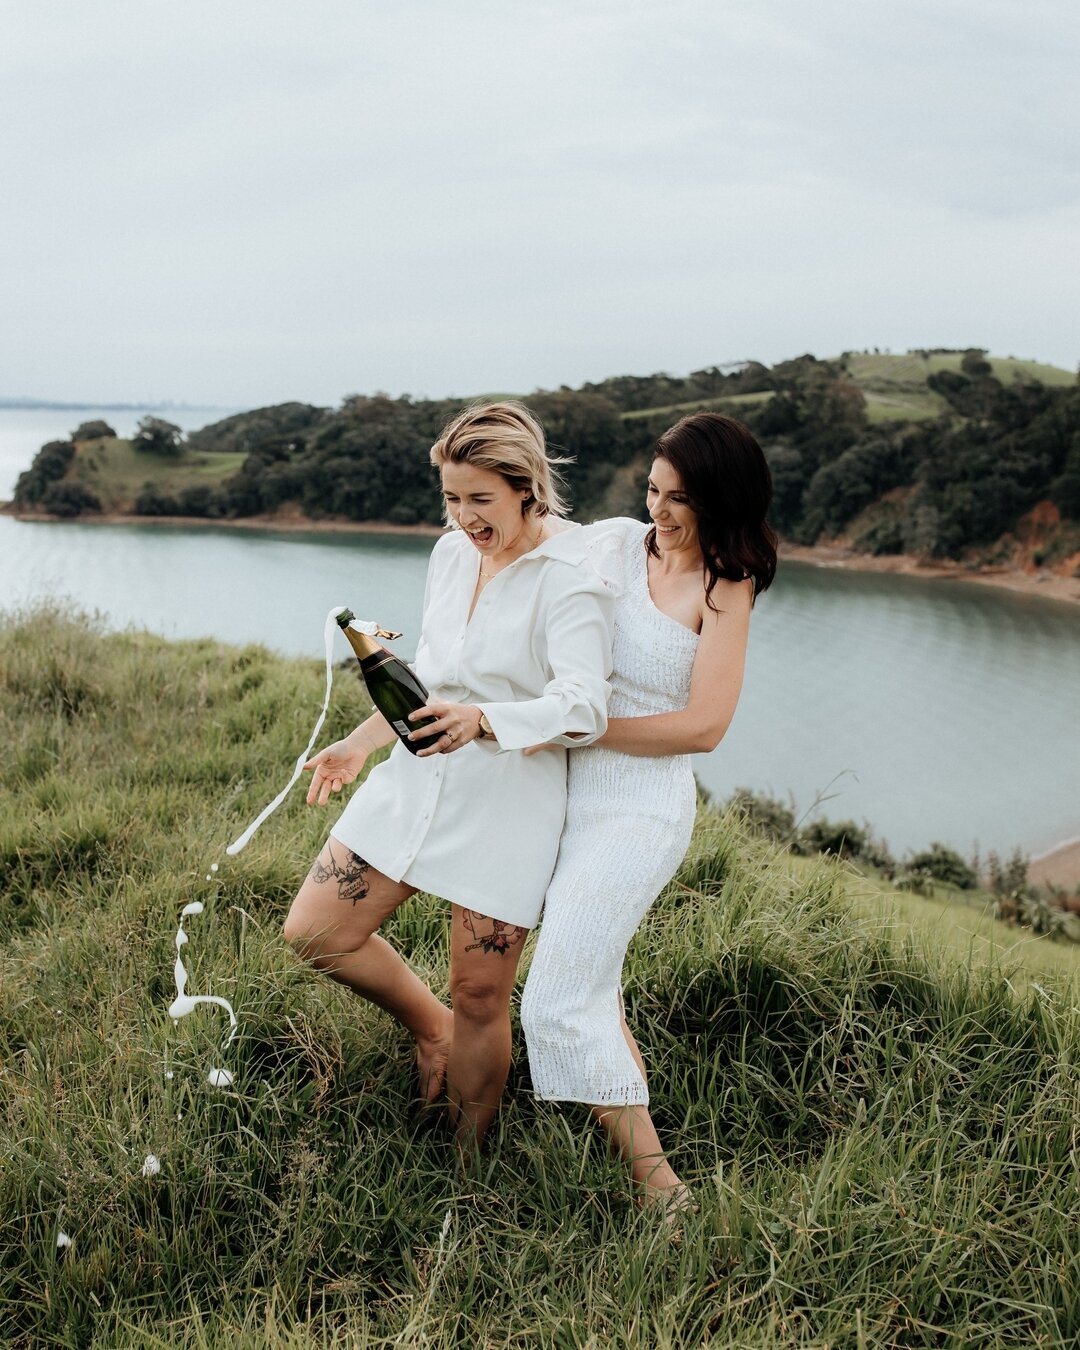 Hannah and Kelsey poppin' bottles.⠀⠀⠀⠀⠀⠀⠀⠀⠀
⠀⠀⠀⠀⠀⠀⠀⠀⠀
Had the besssst afternoon with these two, exploring paddocks, hills and waterfronts after their intimate elopement on Waiheke Island. Absolute legends.⠀⠀⠀⠀⠀⠀⠀⠀⠀
⠀⠀⠀⠀⠀⠀⠀⠀⠀
Hair and makeup by @thepe